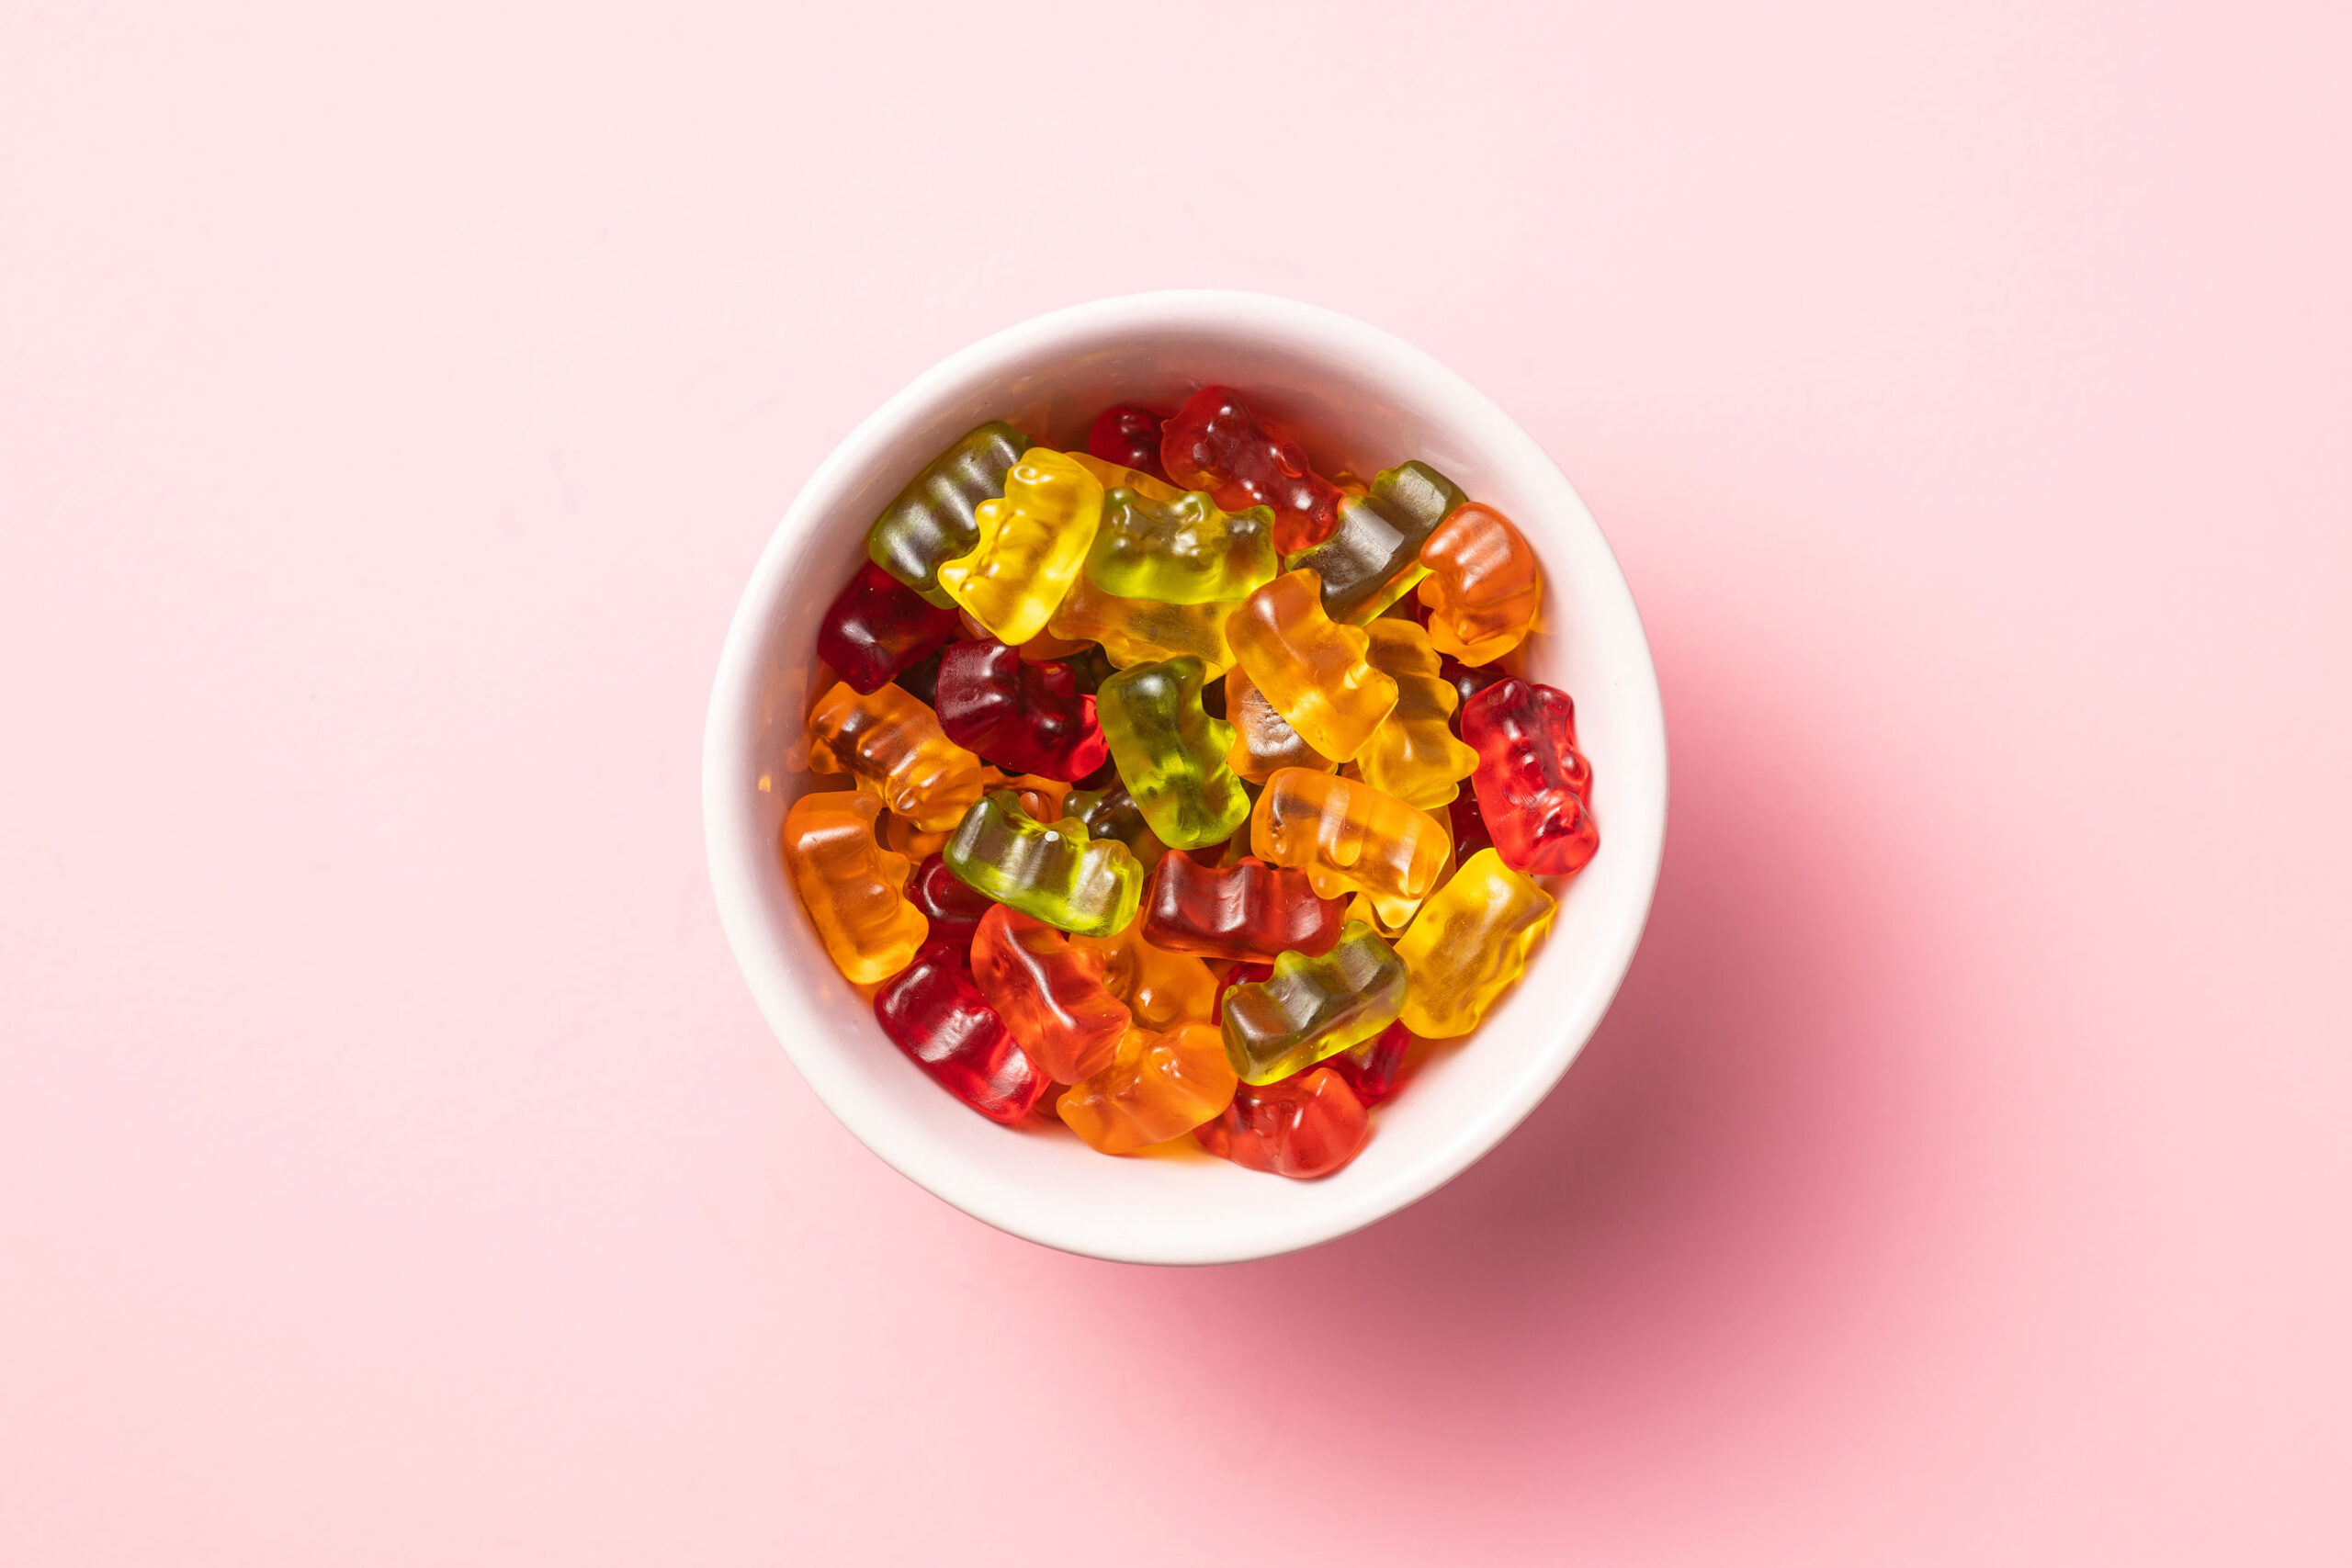 Get Your Omega-3 Fix With These Delicious Gummies